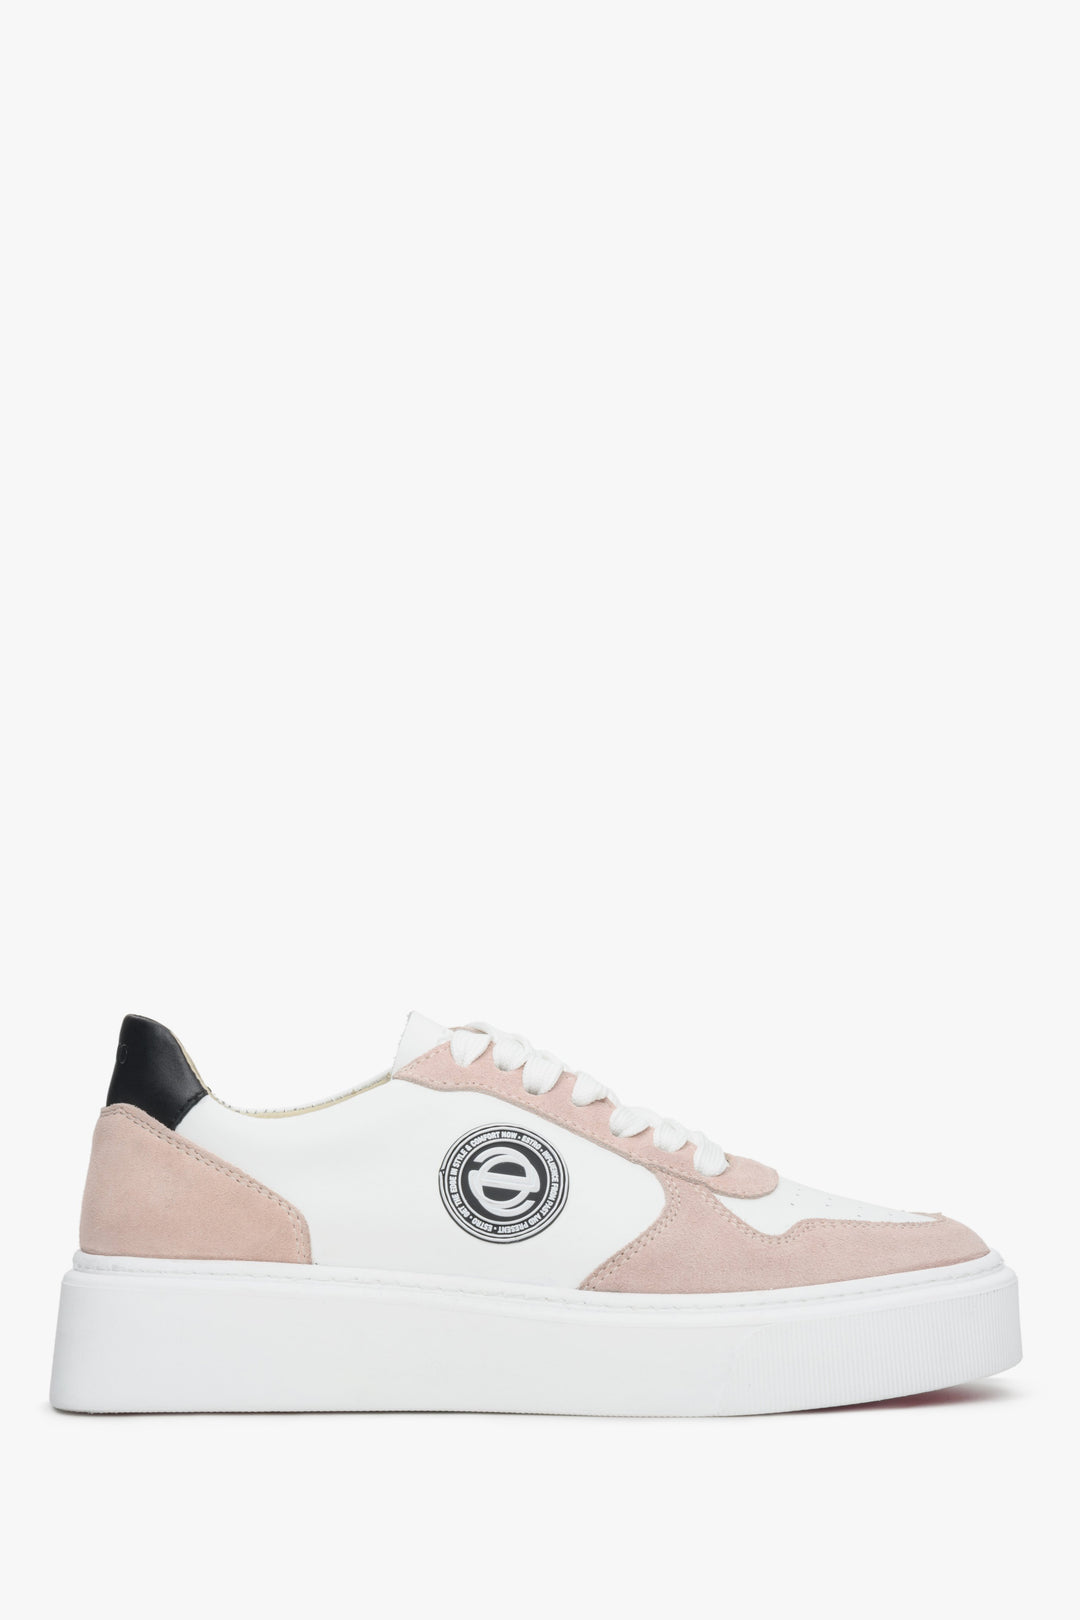 Women's Pink and White Leather Sneakers Estro ER00113063